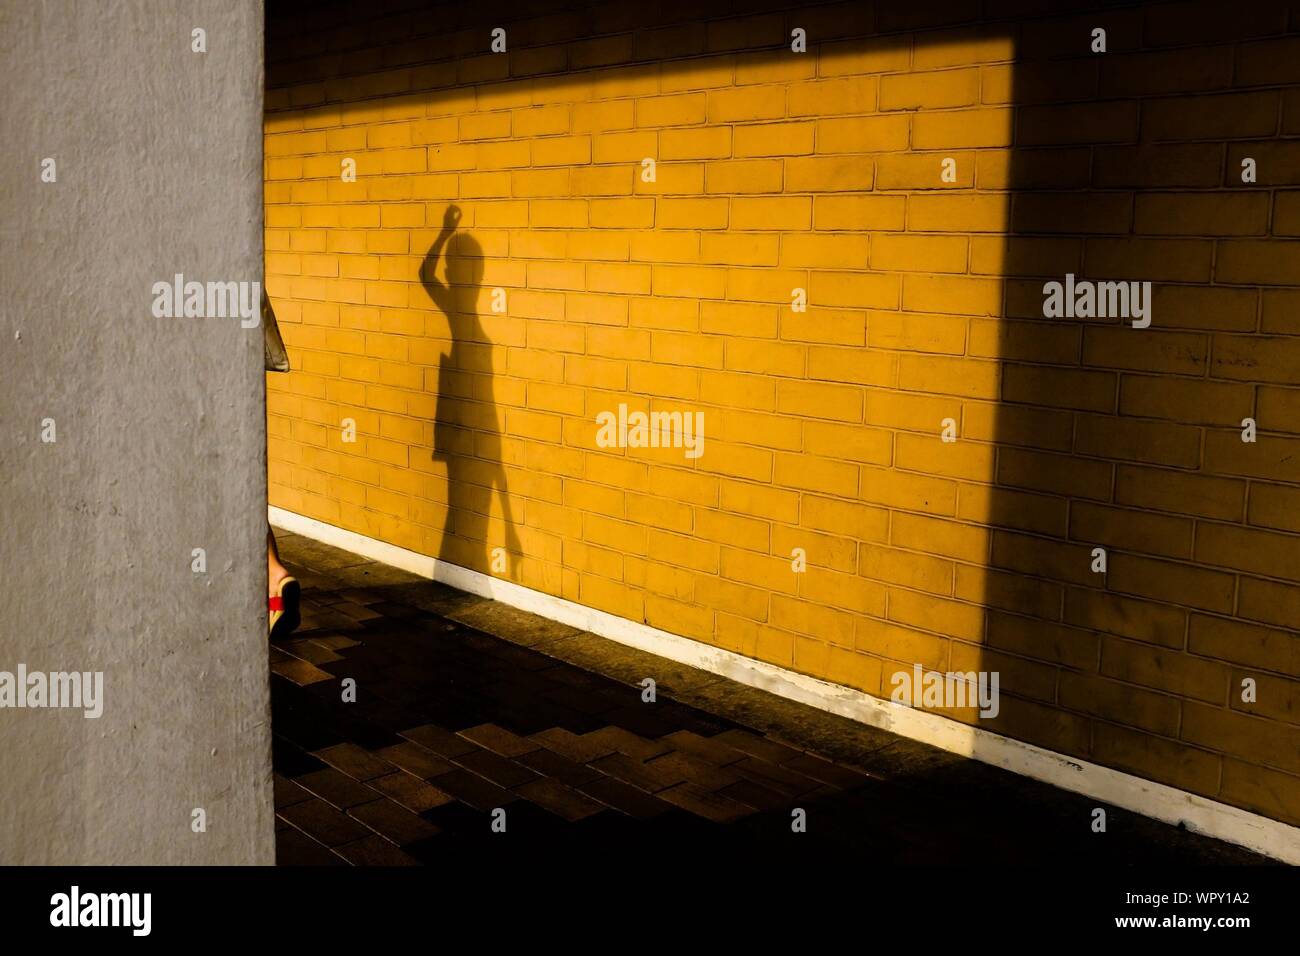 Shadow Of Person On Yellow Brick Wall Stock Photo